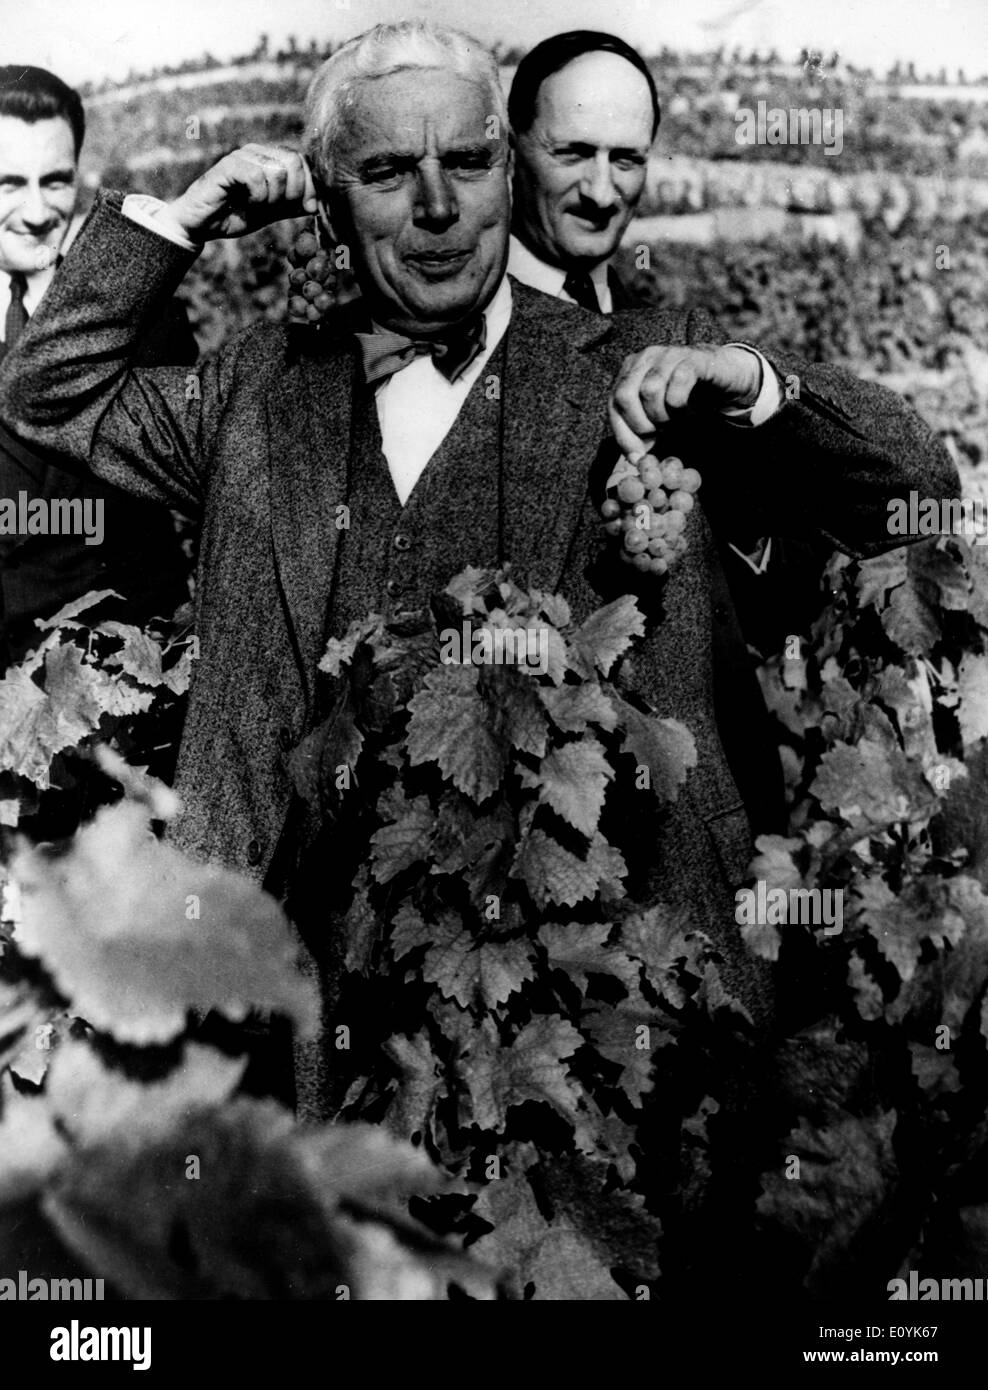 Actor Charlie Chaplin picking grapes Stock Photo